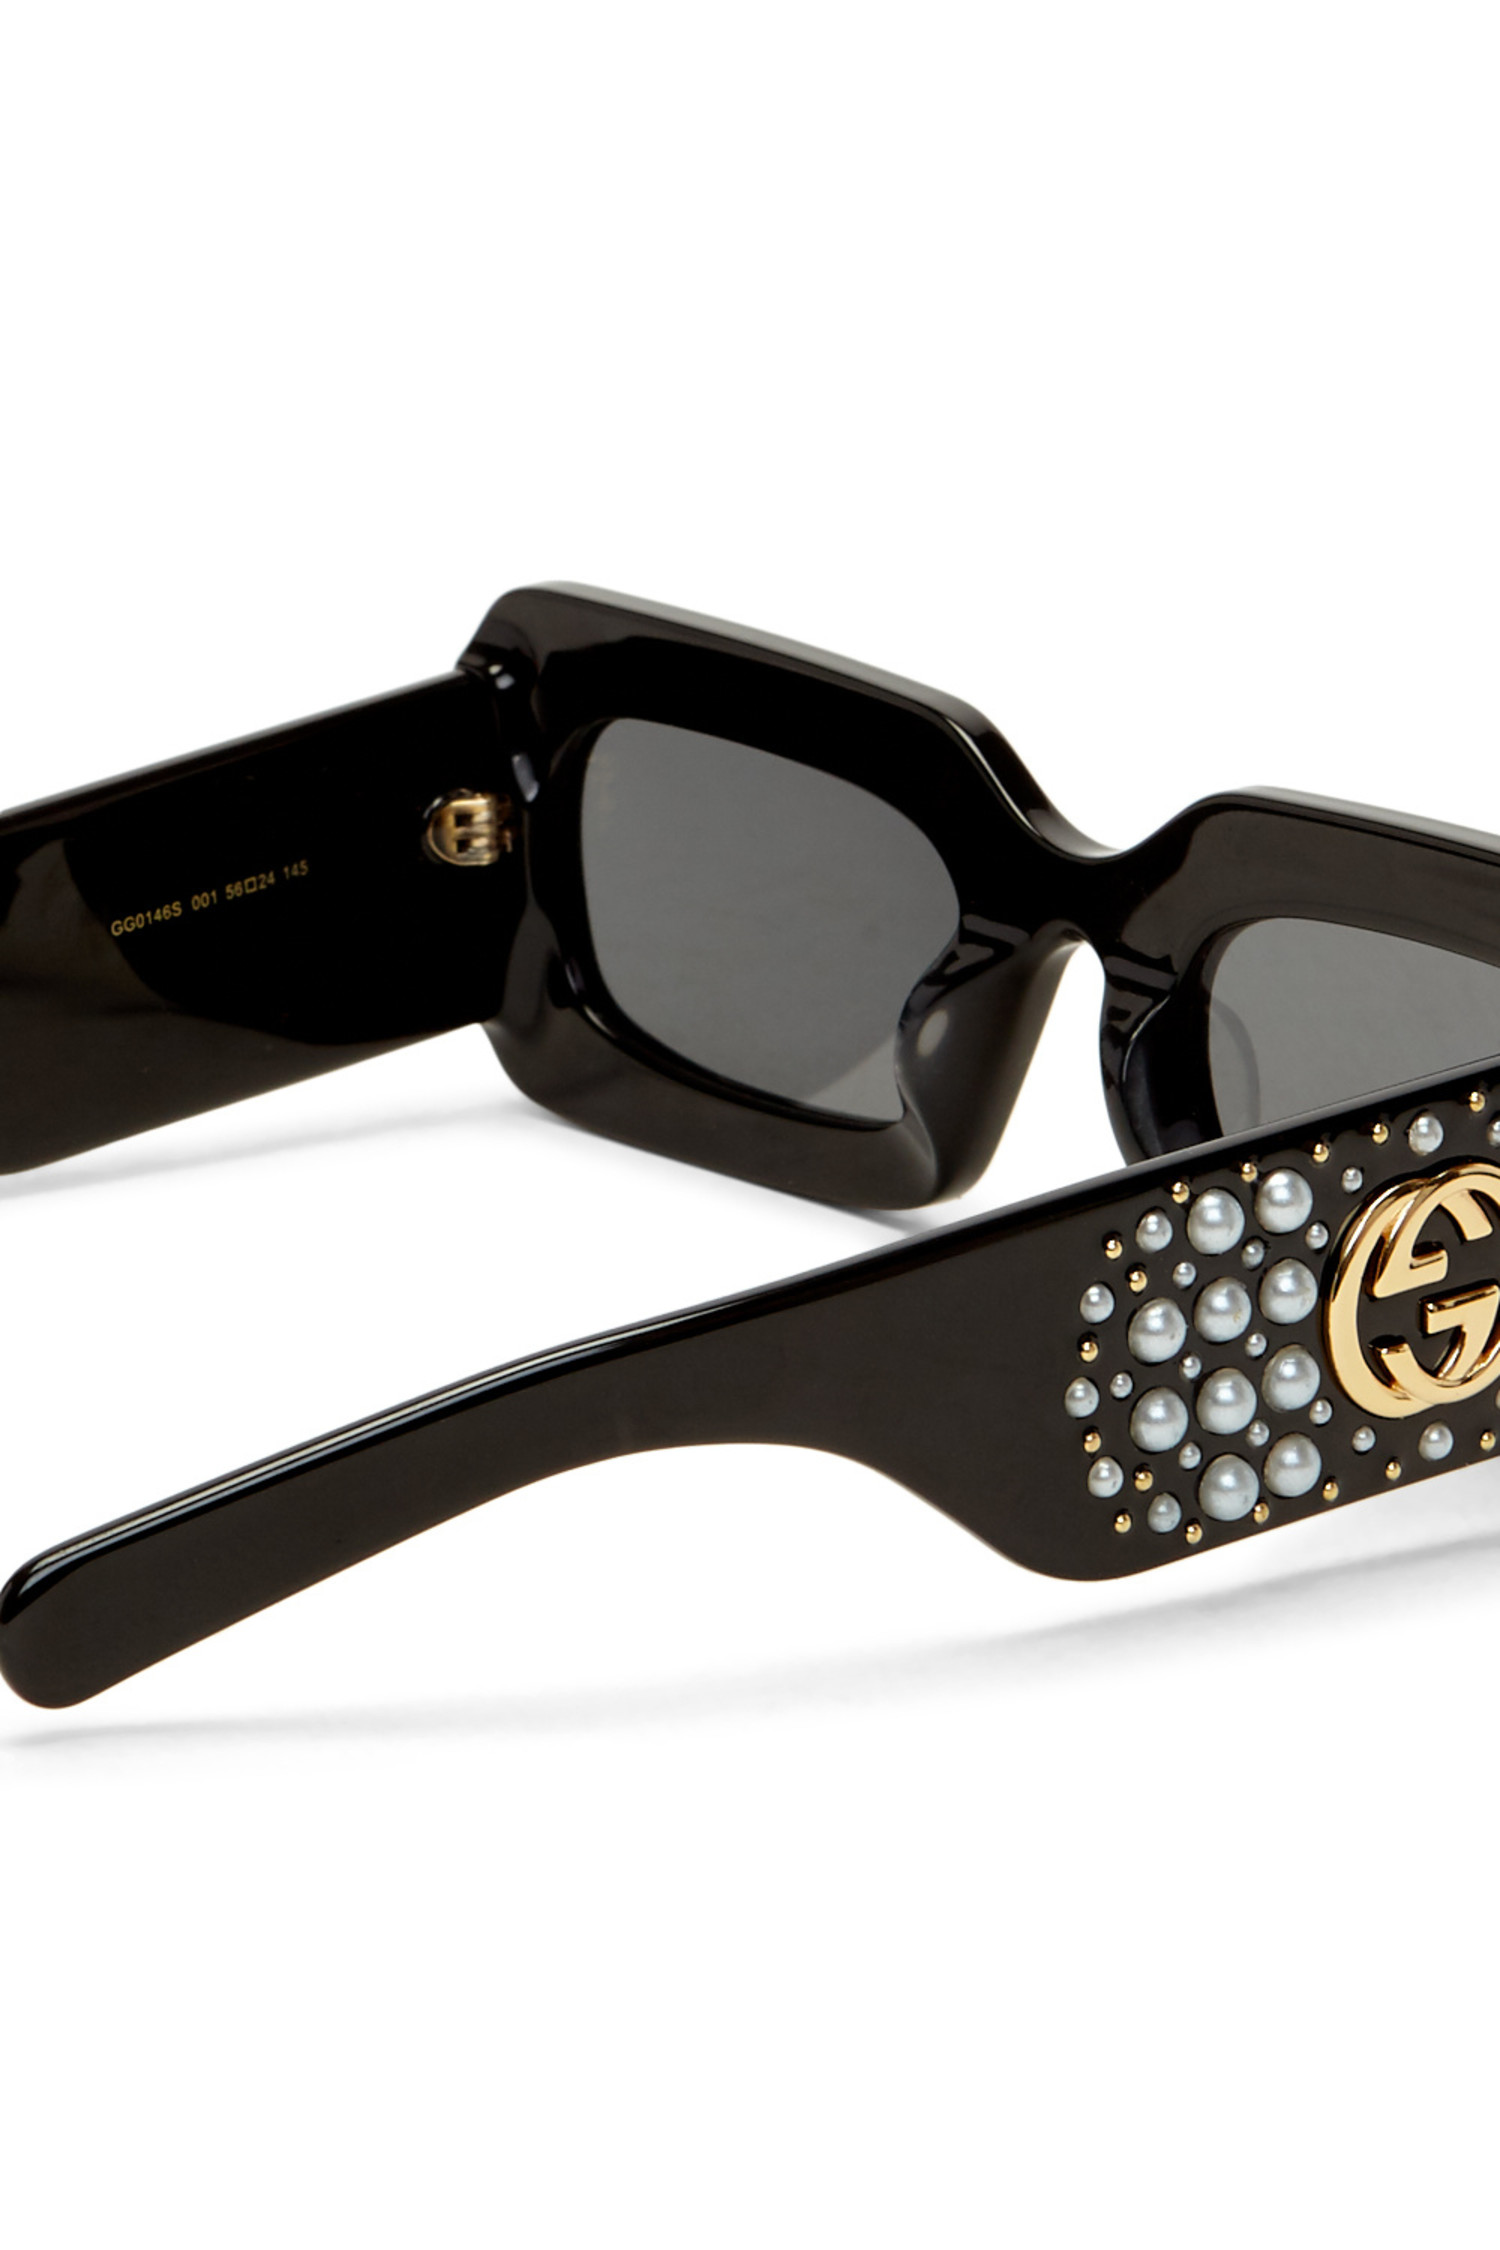 gucci sunglasses with pearls